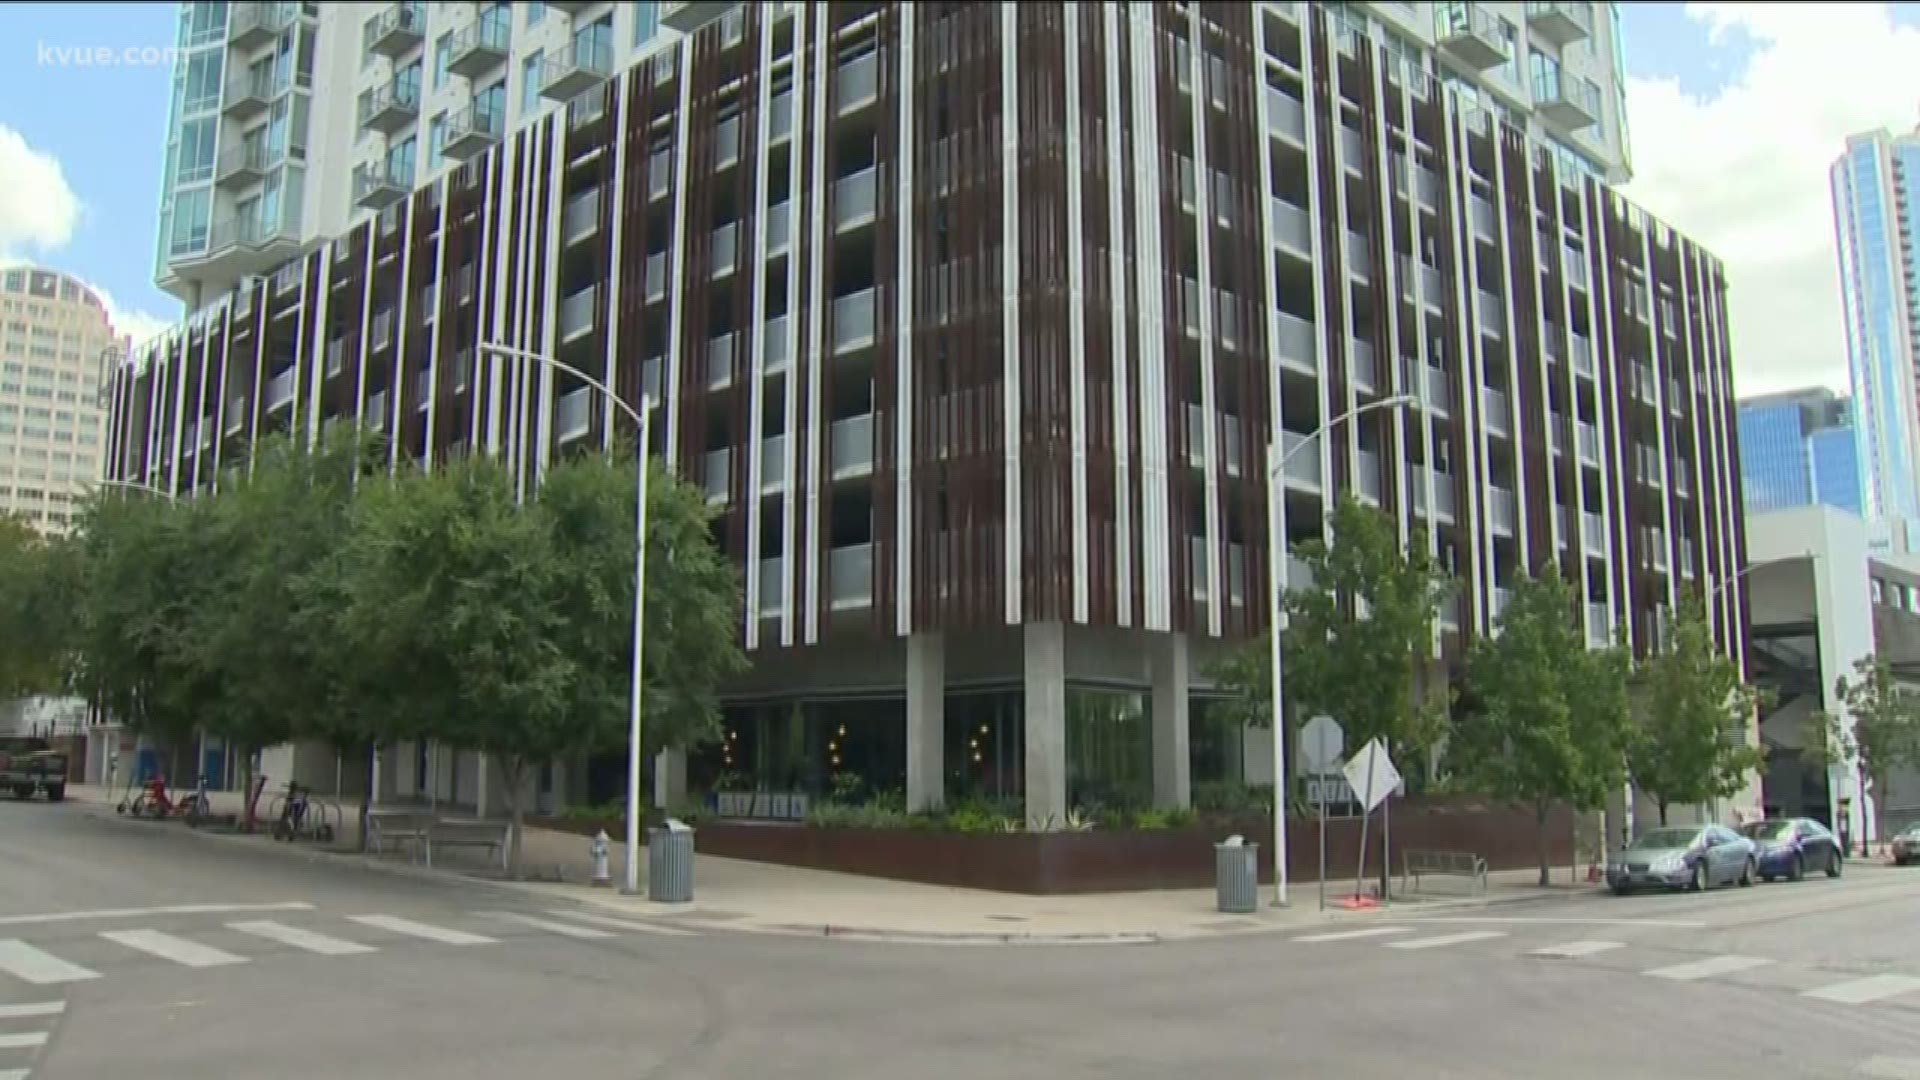 Nearly two dozen burglaries have been reported in the Downtown Austin area since July and police think they're connected.